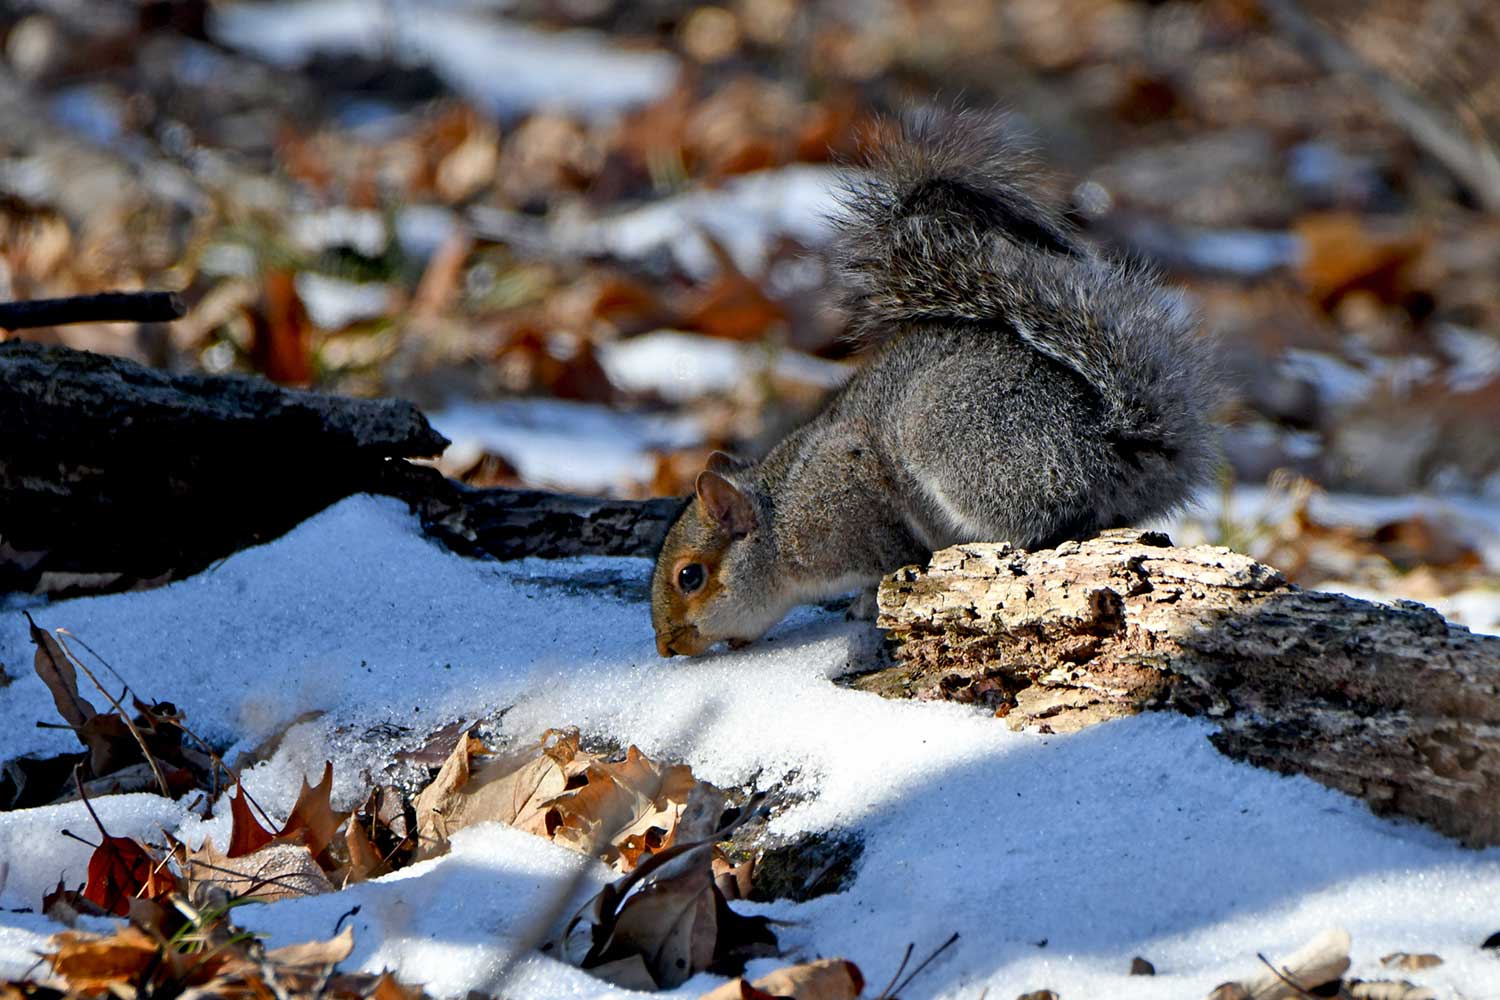 A gray squirrel eating snow on the ground with a thin cover of snow and fallen leaves and branches.